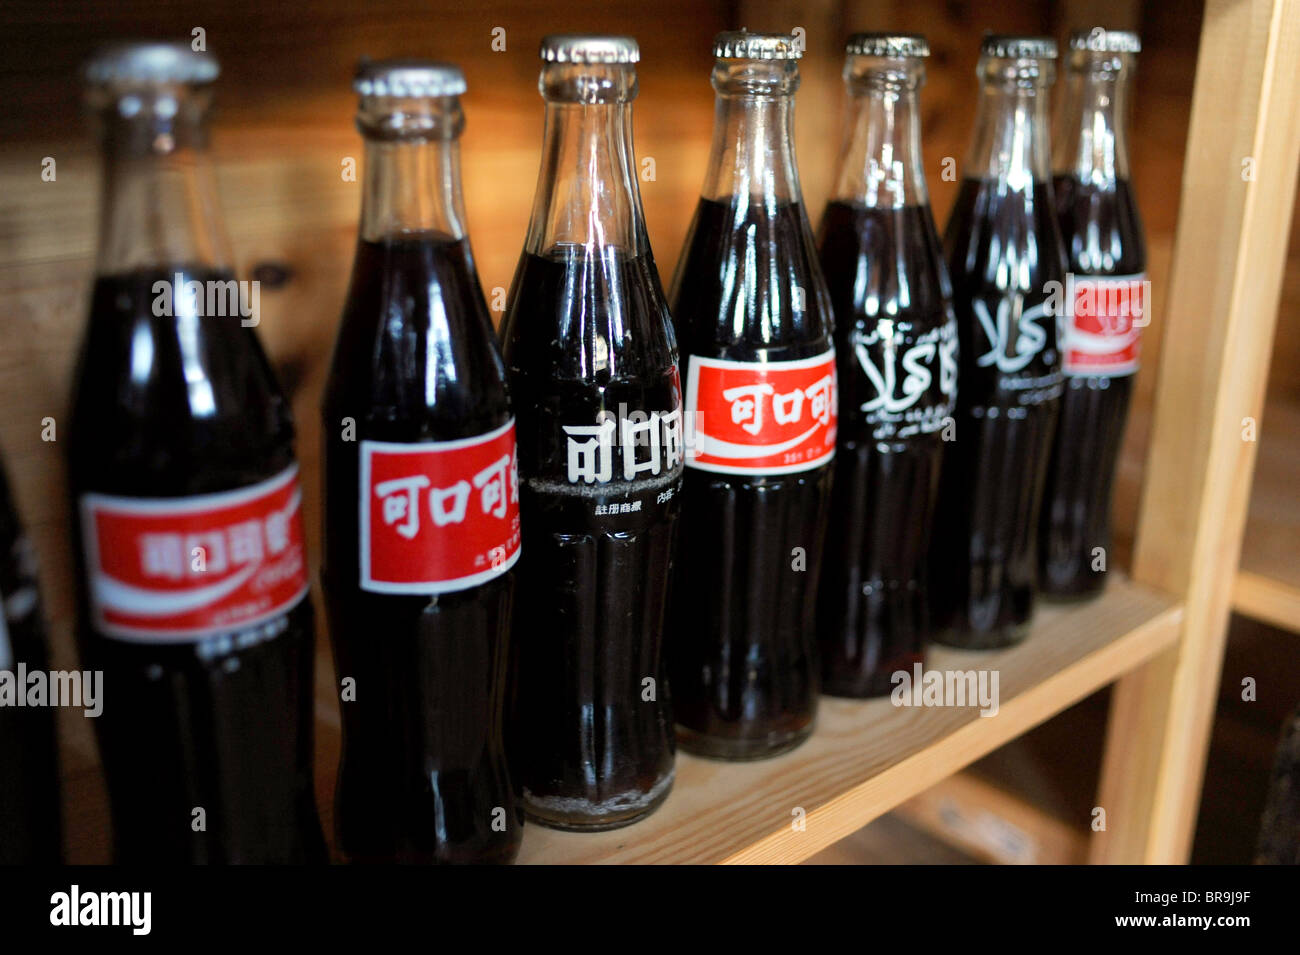 Old bottles of Coca Cola with Japanese labels Stock Photo